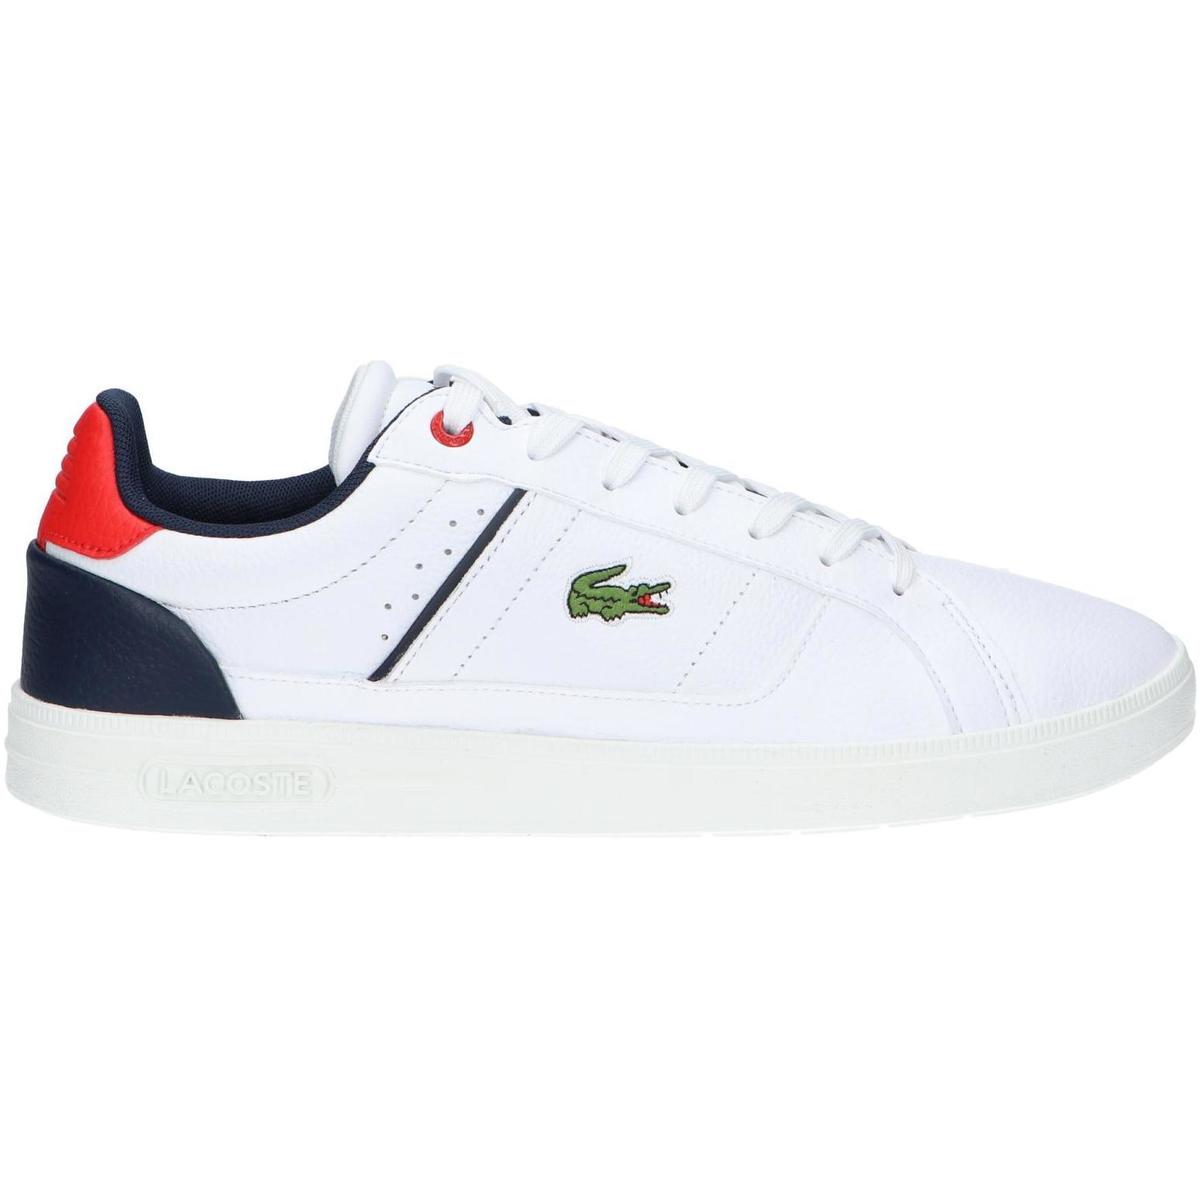 Chaussures Homme Multisport Lacoste 45SMA0095 EUROPA 45SMA0095 EUROPA 